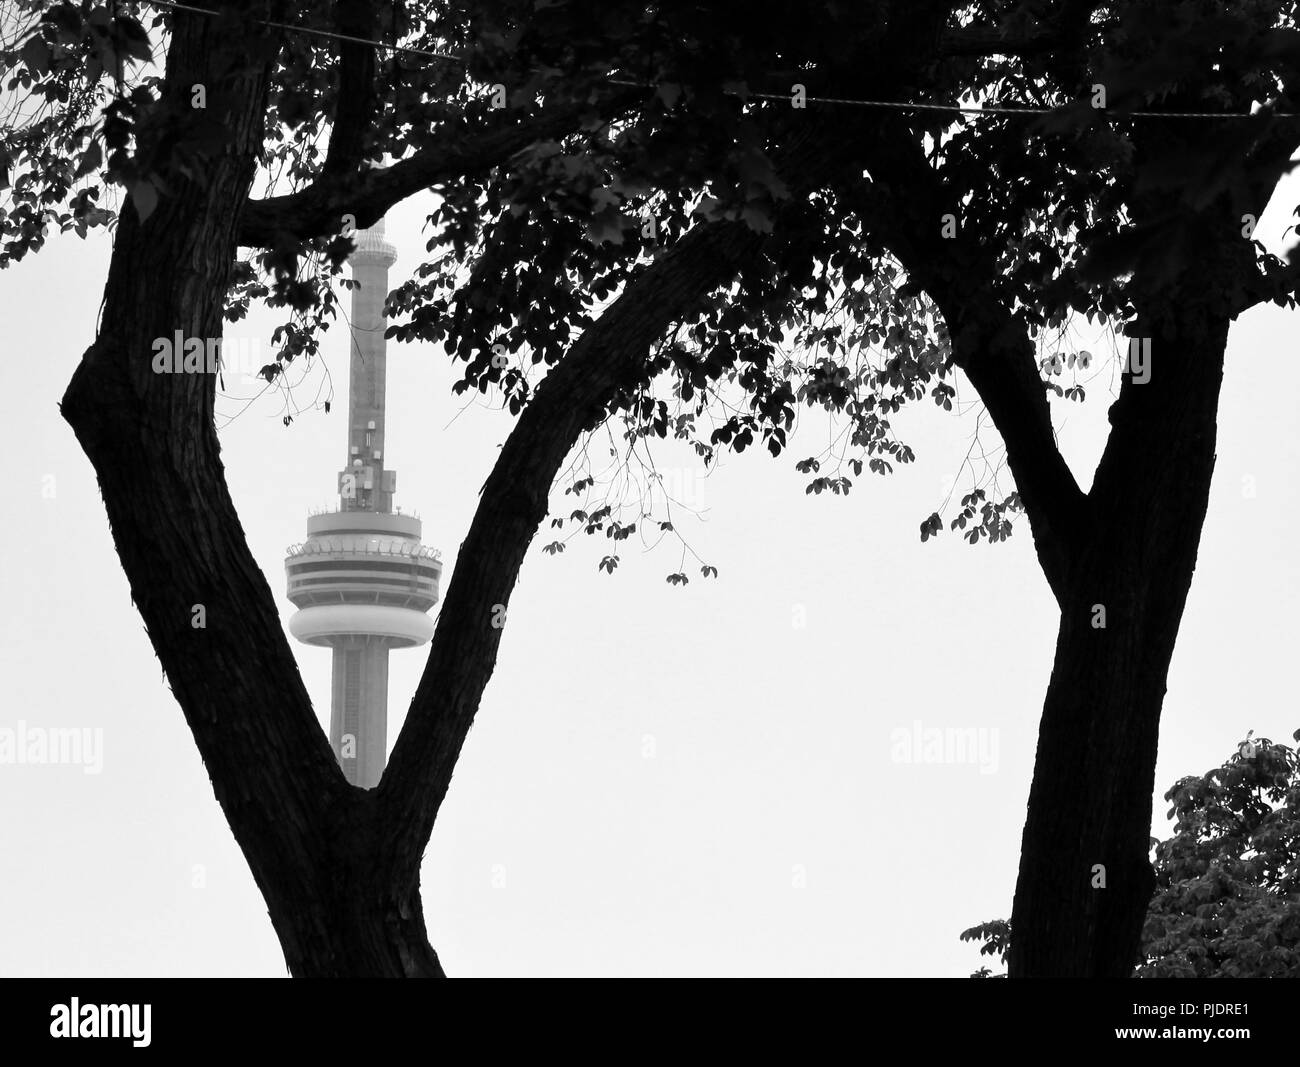 CN Tower behind trees Stock Photo